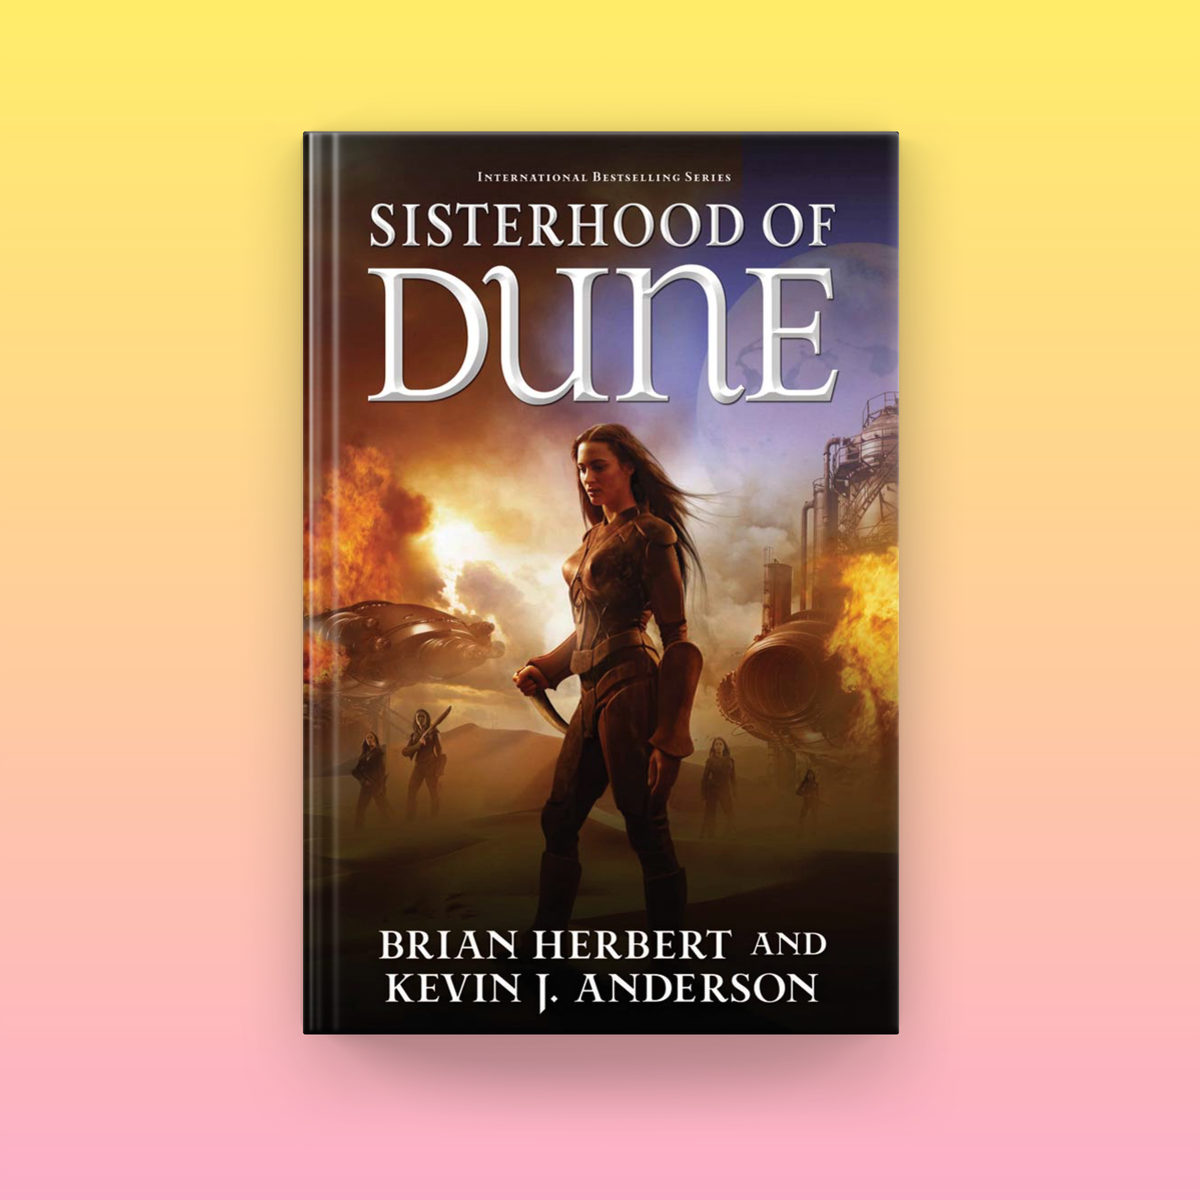 Dune fans, the excitement continues… Learn how the Bene Gesserit came to be in Sisterhood of Dune by @DuneAuthor and @TheKJA, the story that inspired the new #DuneProphecy series coming this fall. apple.co/Sisterhood